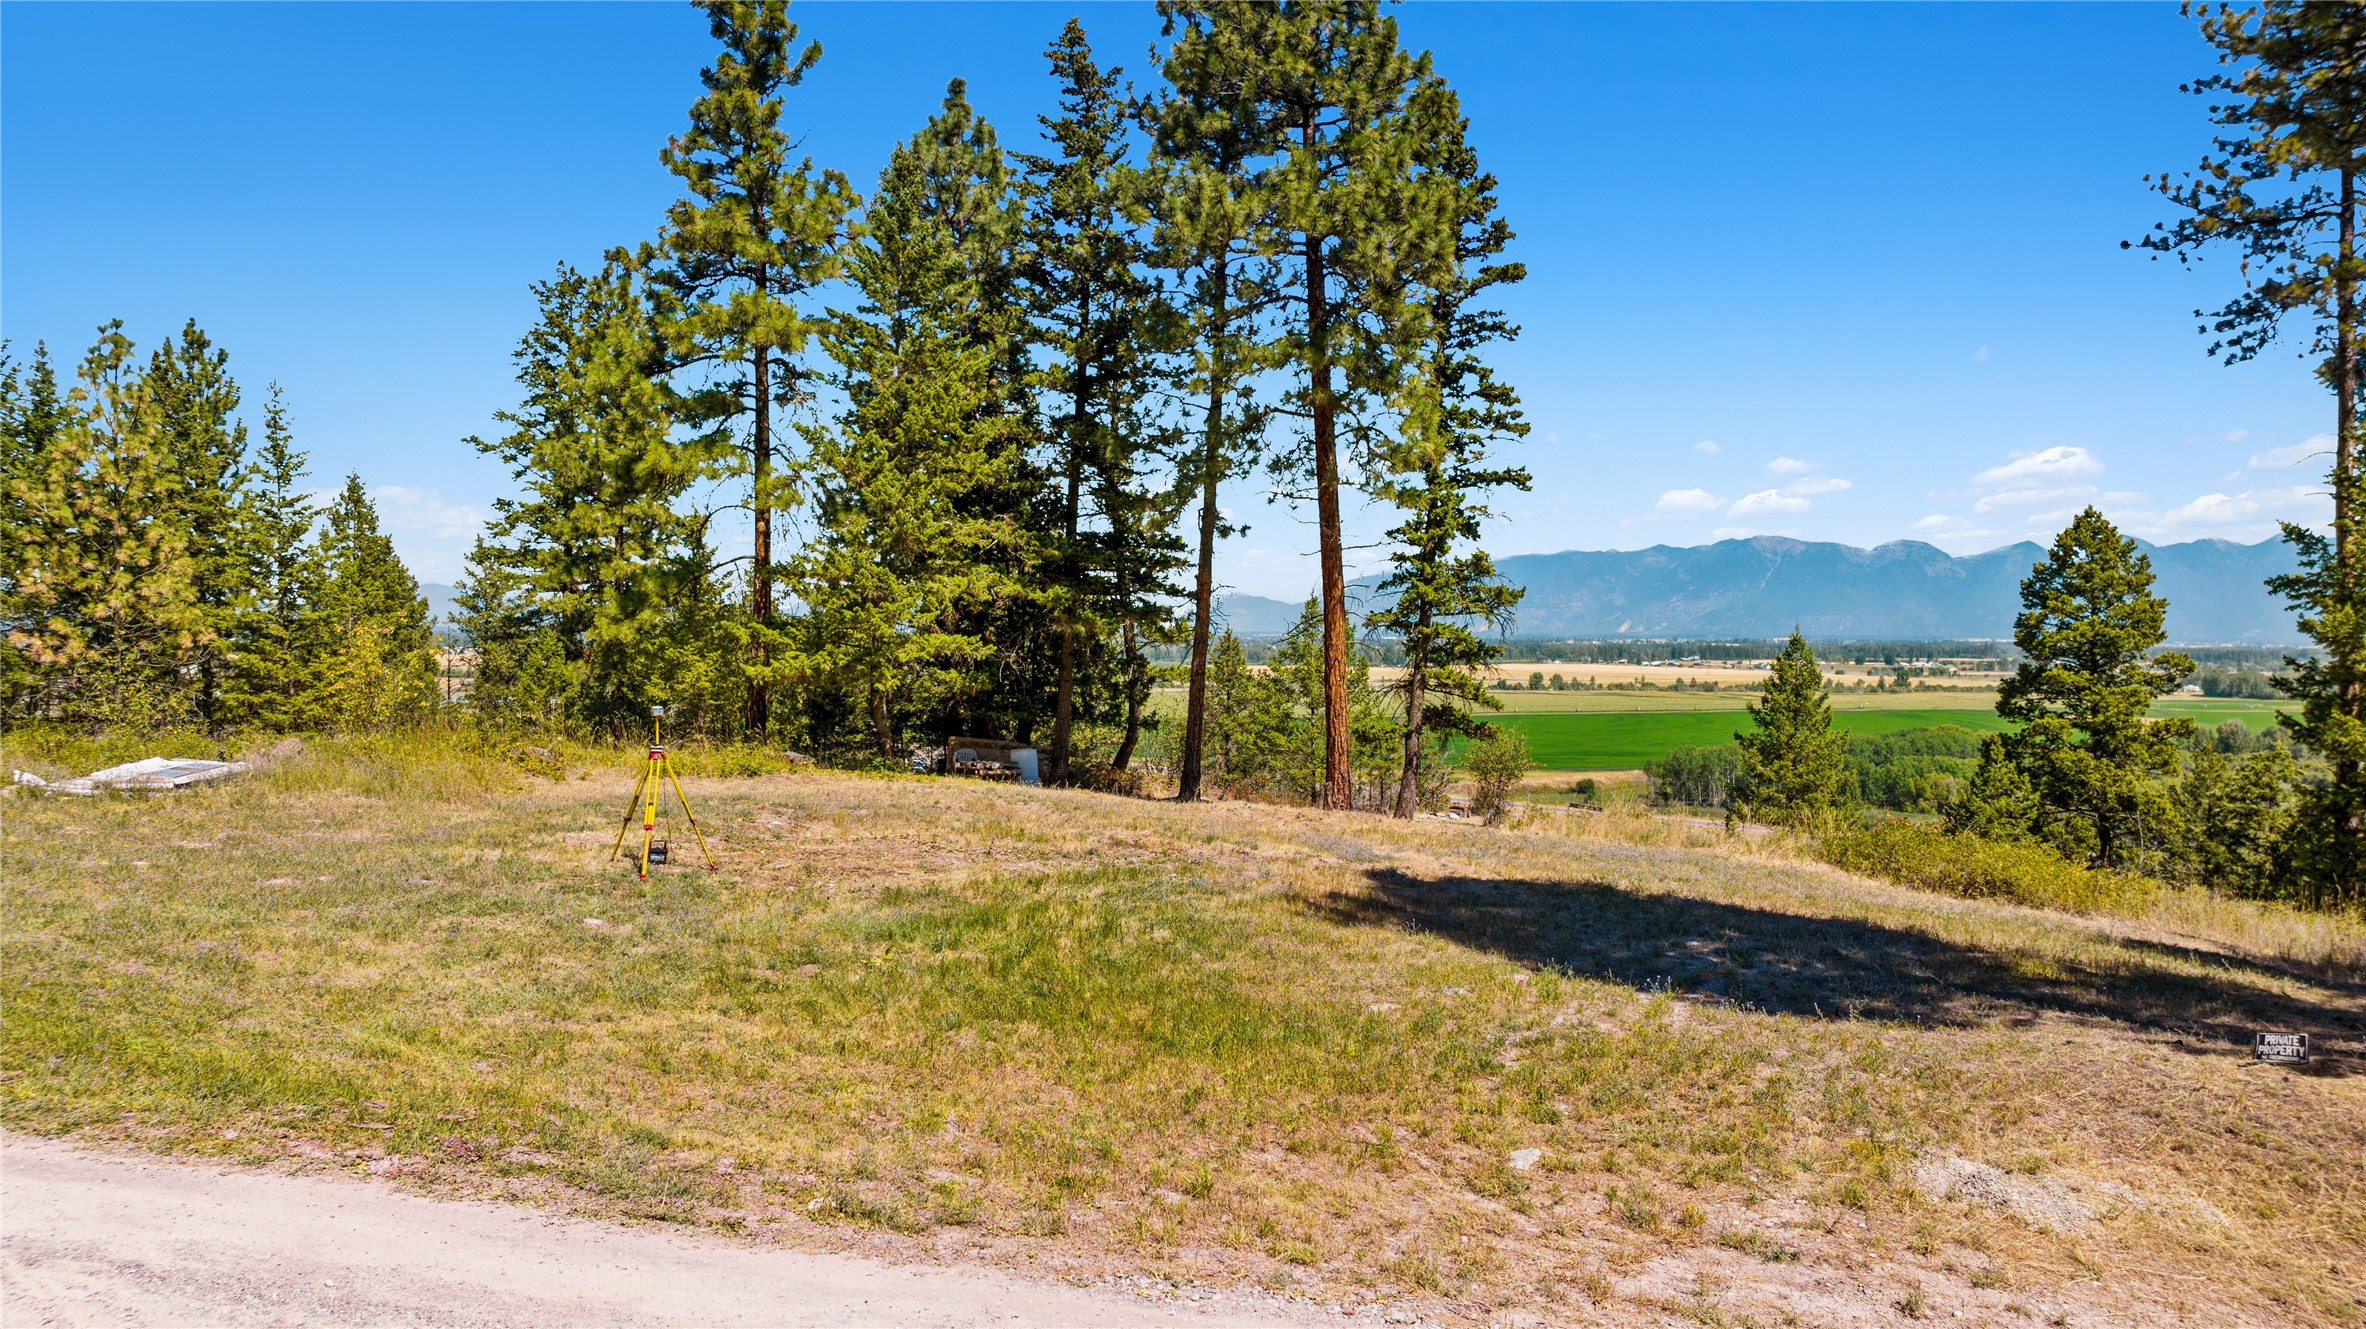 Remarks: Call your builder! Great opportunity on this private, clifftop 4+ acre lot, conveniently located only 6 miles south of downtown Kalispell. Breathtaking views North to Glacier National Park and Big Mountain! Or stare due East at the Swan and Jewel Basin Ranges! Several options for building sites throughout the mixed terrain. No CCR's or HOA. Electric is at the property line. Opportunity to share well with seller who lives on neighboring parcel, with a 60 gpm well. Recent survey conducted with all corners pinned and angles flagged. Septic perc'd and surveyed. Wildlife including deer and elk frequent the property regularly. Seller financing available on this peaceful country setting parcel. Call John A. Busic at (406) 298-3050, or your real estate professional. Buyer Financing - min. 10% down, 5% APR, seller carry back note to be negotiated. There is a discrepancy on the lot size between what Cadastral lists (3.54 acres) versus what the recent survey (4.05 acres) says.